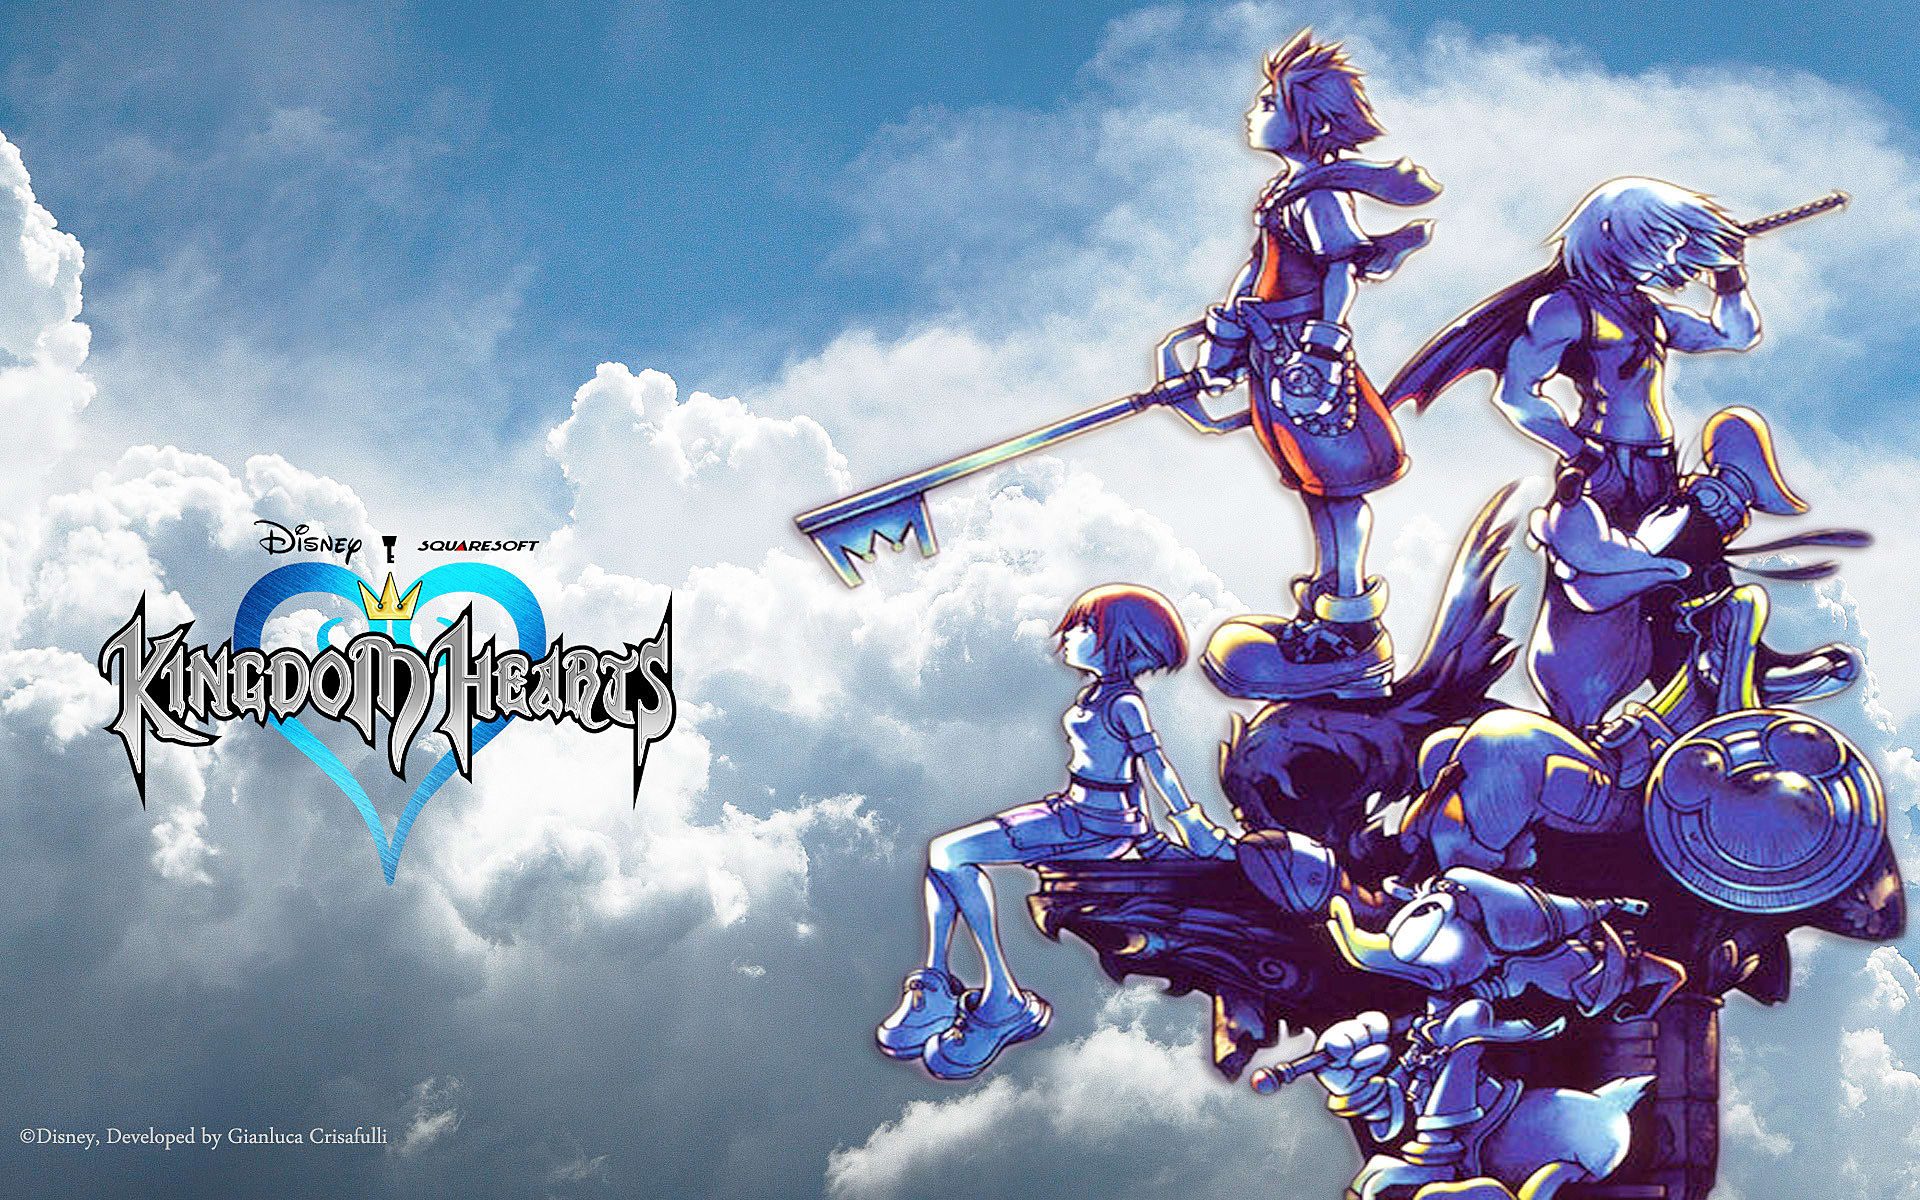 Ranking the Kingdom Hearts Games From Worst to Best